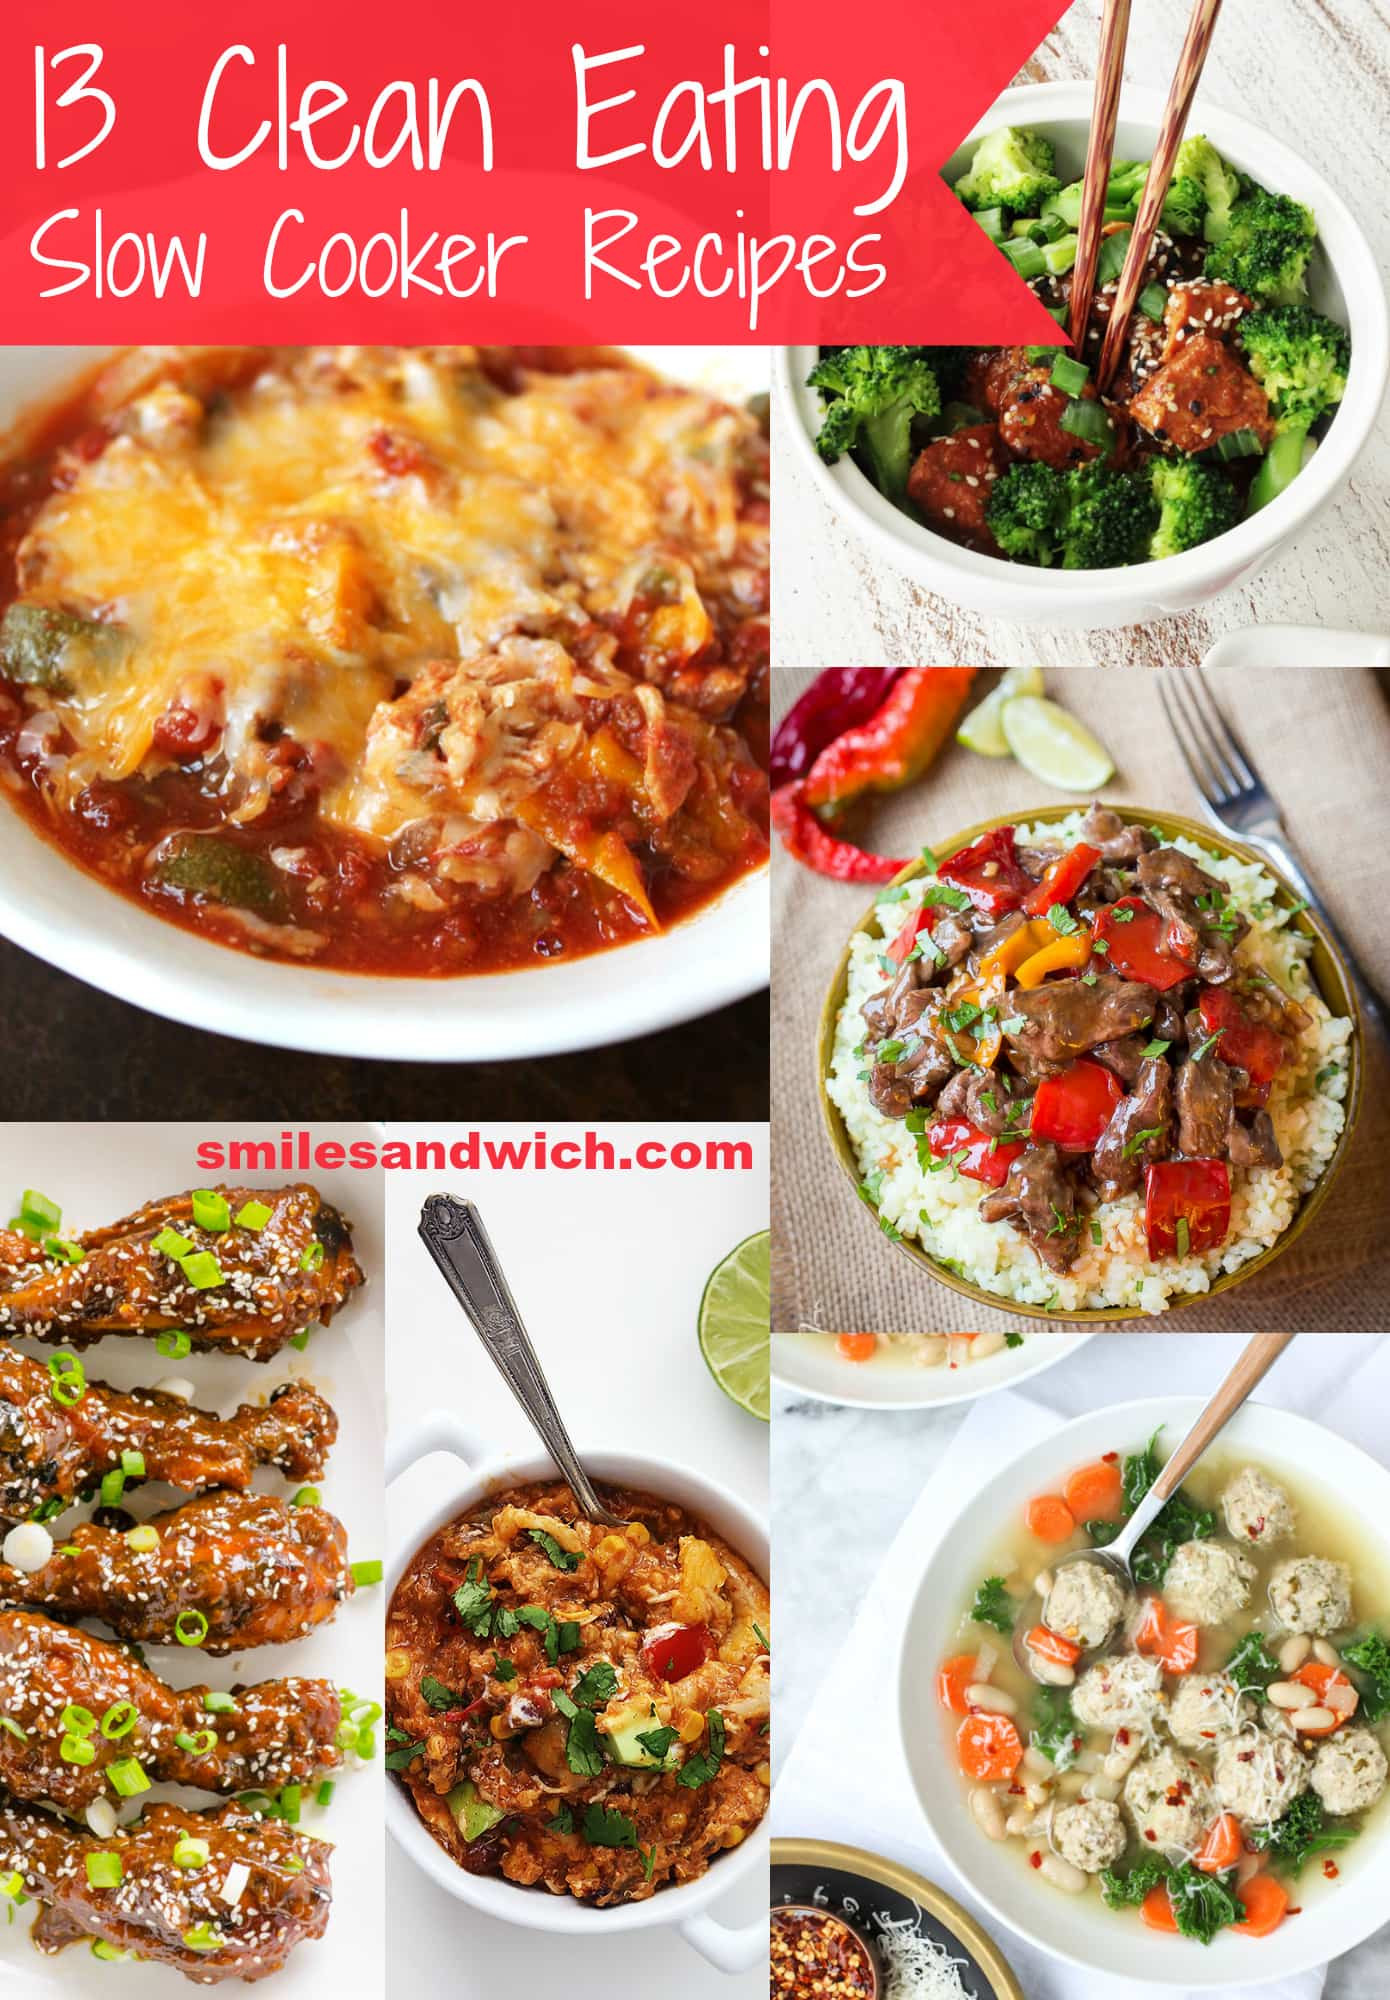 Clean Eating Recipes For Dinner
 13 Clean Eating Slow Cooker Recipes Smile Sandwich